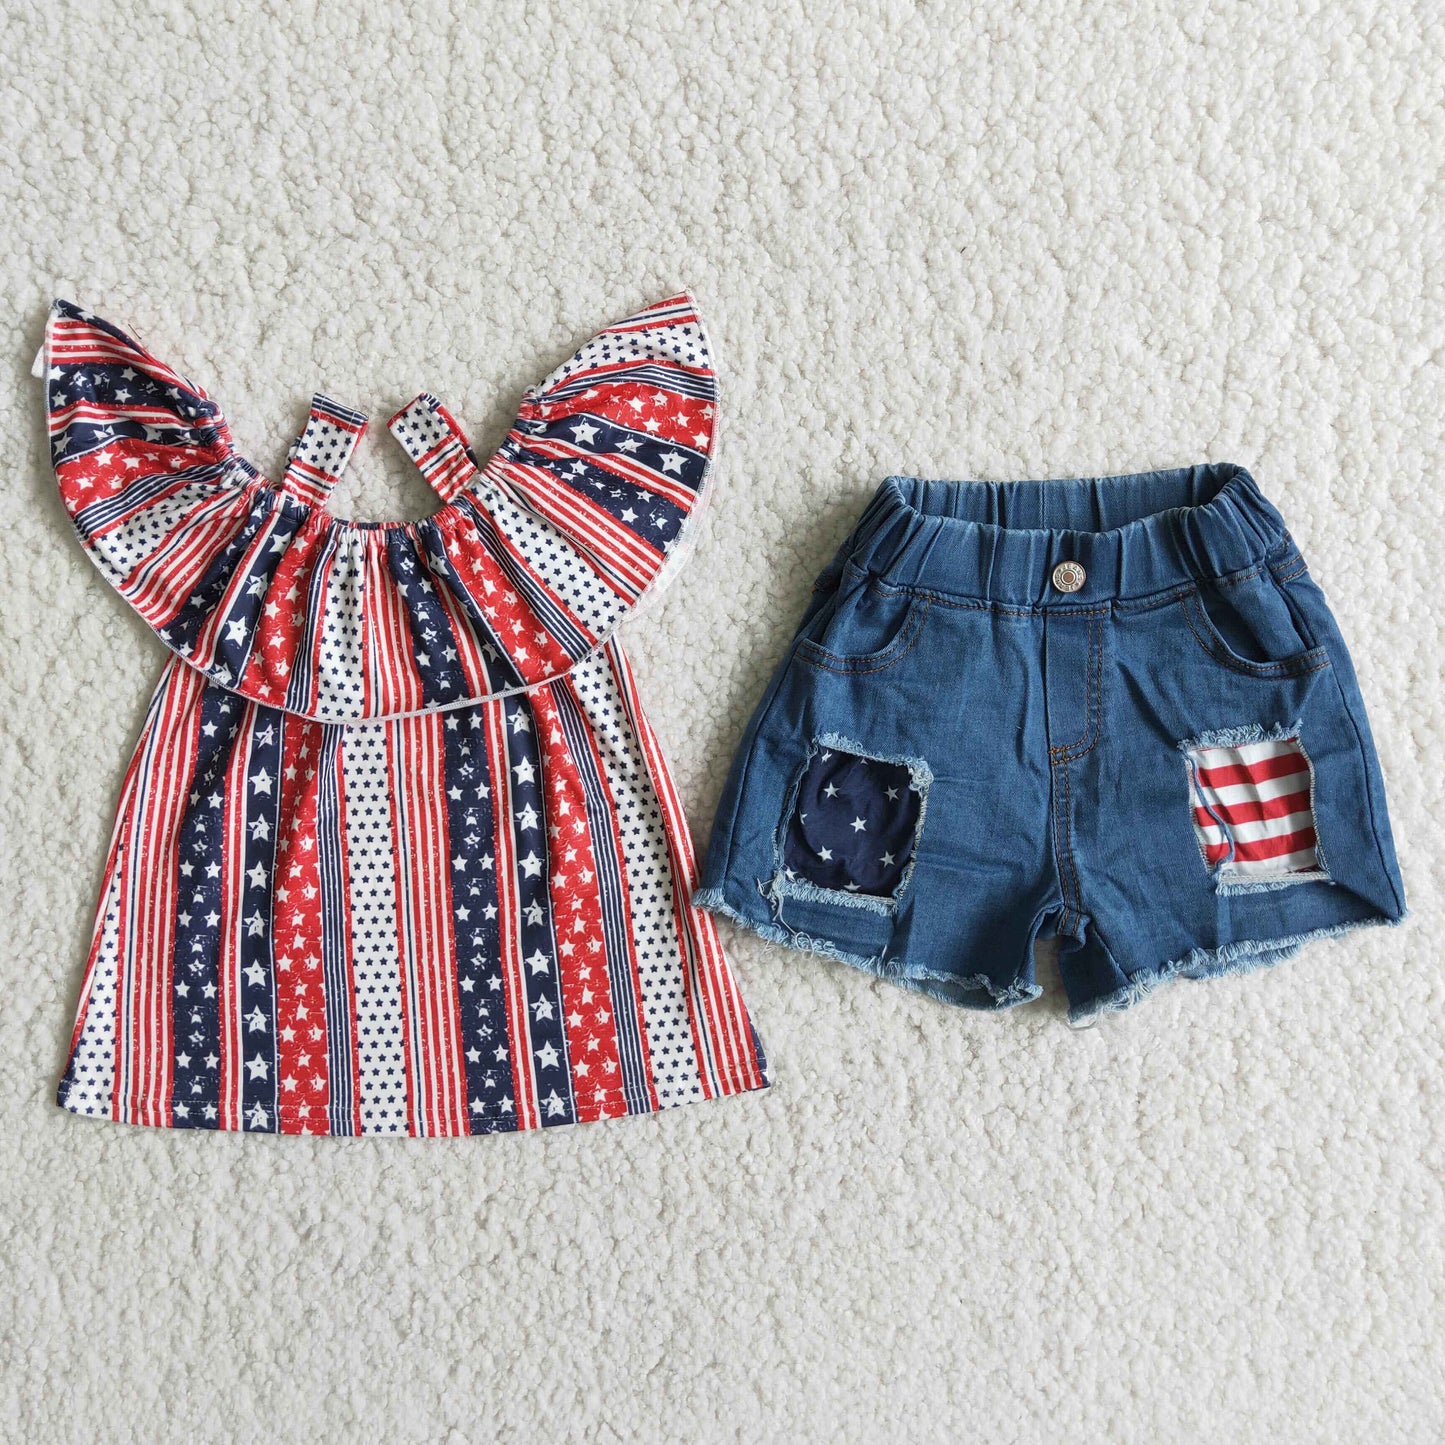 Girls' Denim Shorts 4th of July Clothes